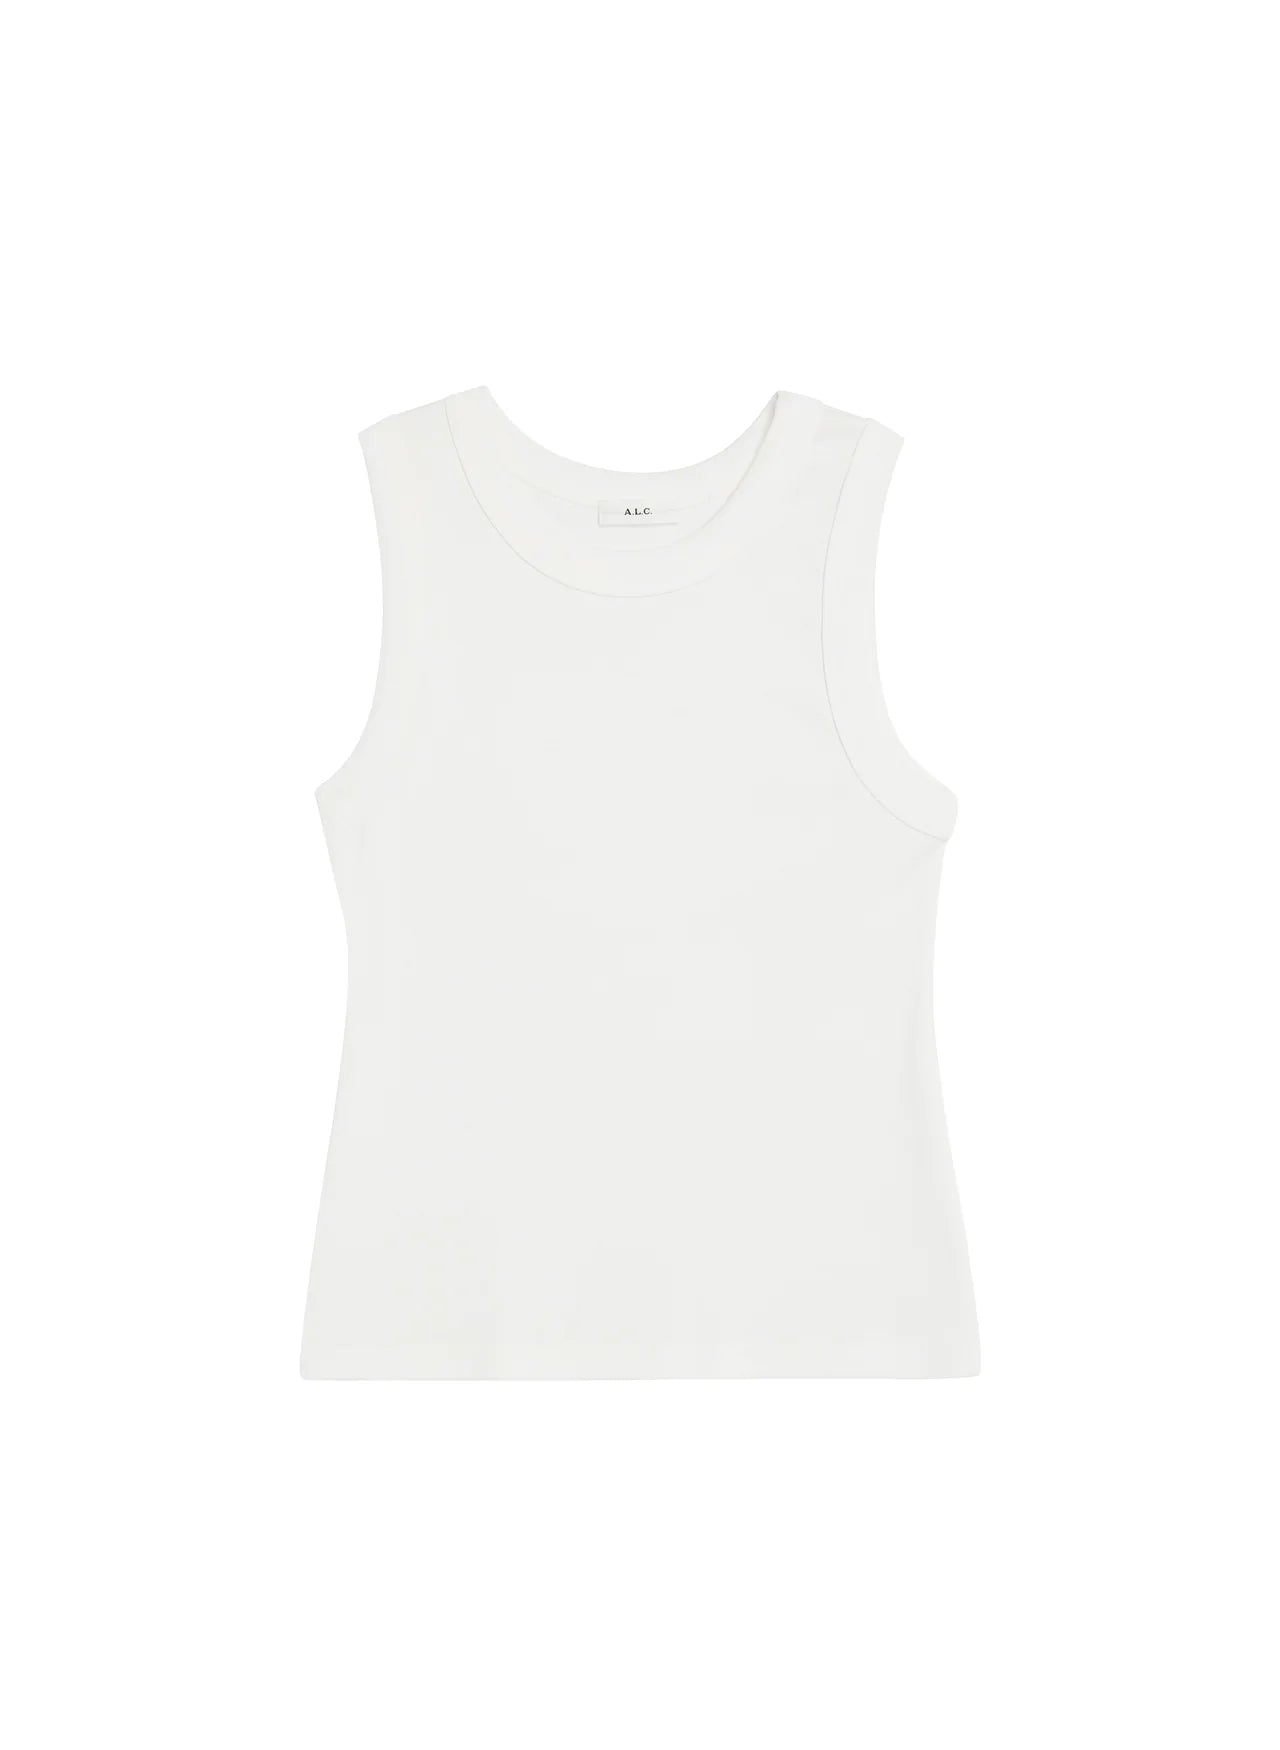 HADLEY TANK - More Colors Available